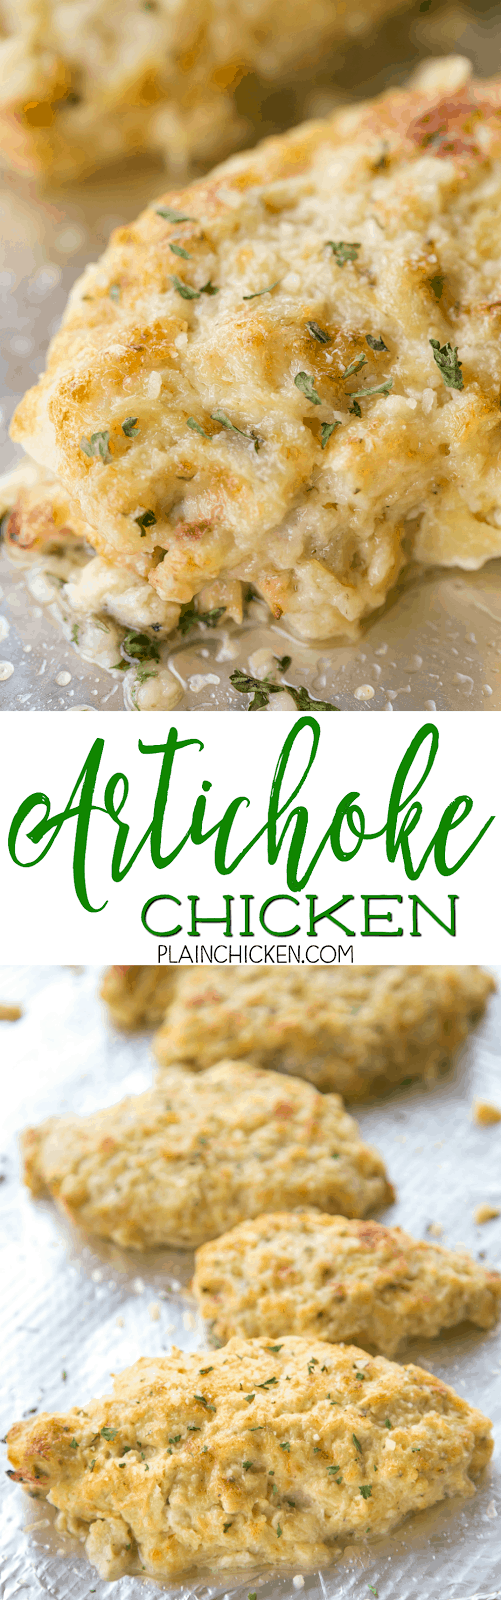 Artichoke Chicken - OMG! Better than any restaurant and ready in under 30 minutes!!! Chicken marinated in italian dressing, topped with cheesy artichoke dip and baked. Only 6 ingredients - Chicken, Italian dressing, artichokes, mayonnaise, garlic, parmesan cheese. Can assemble chicken earlier in the day and bake when ready. Everyone LOVED this!!!